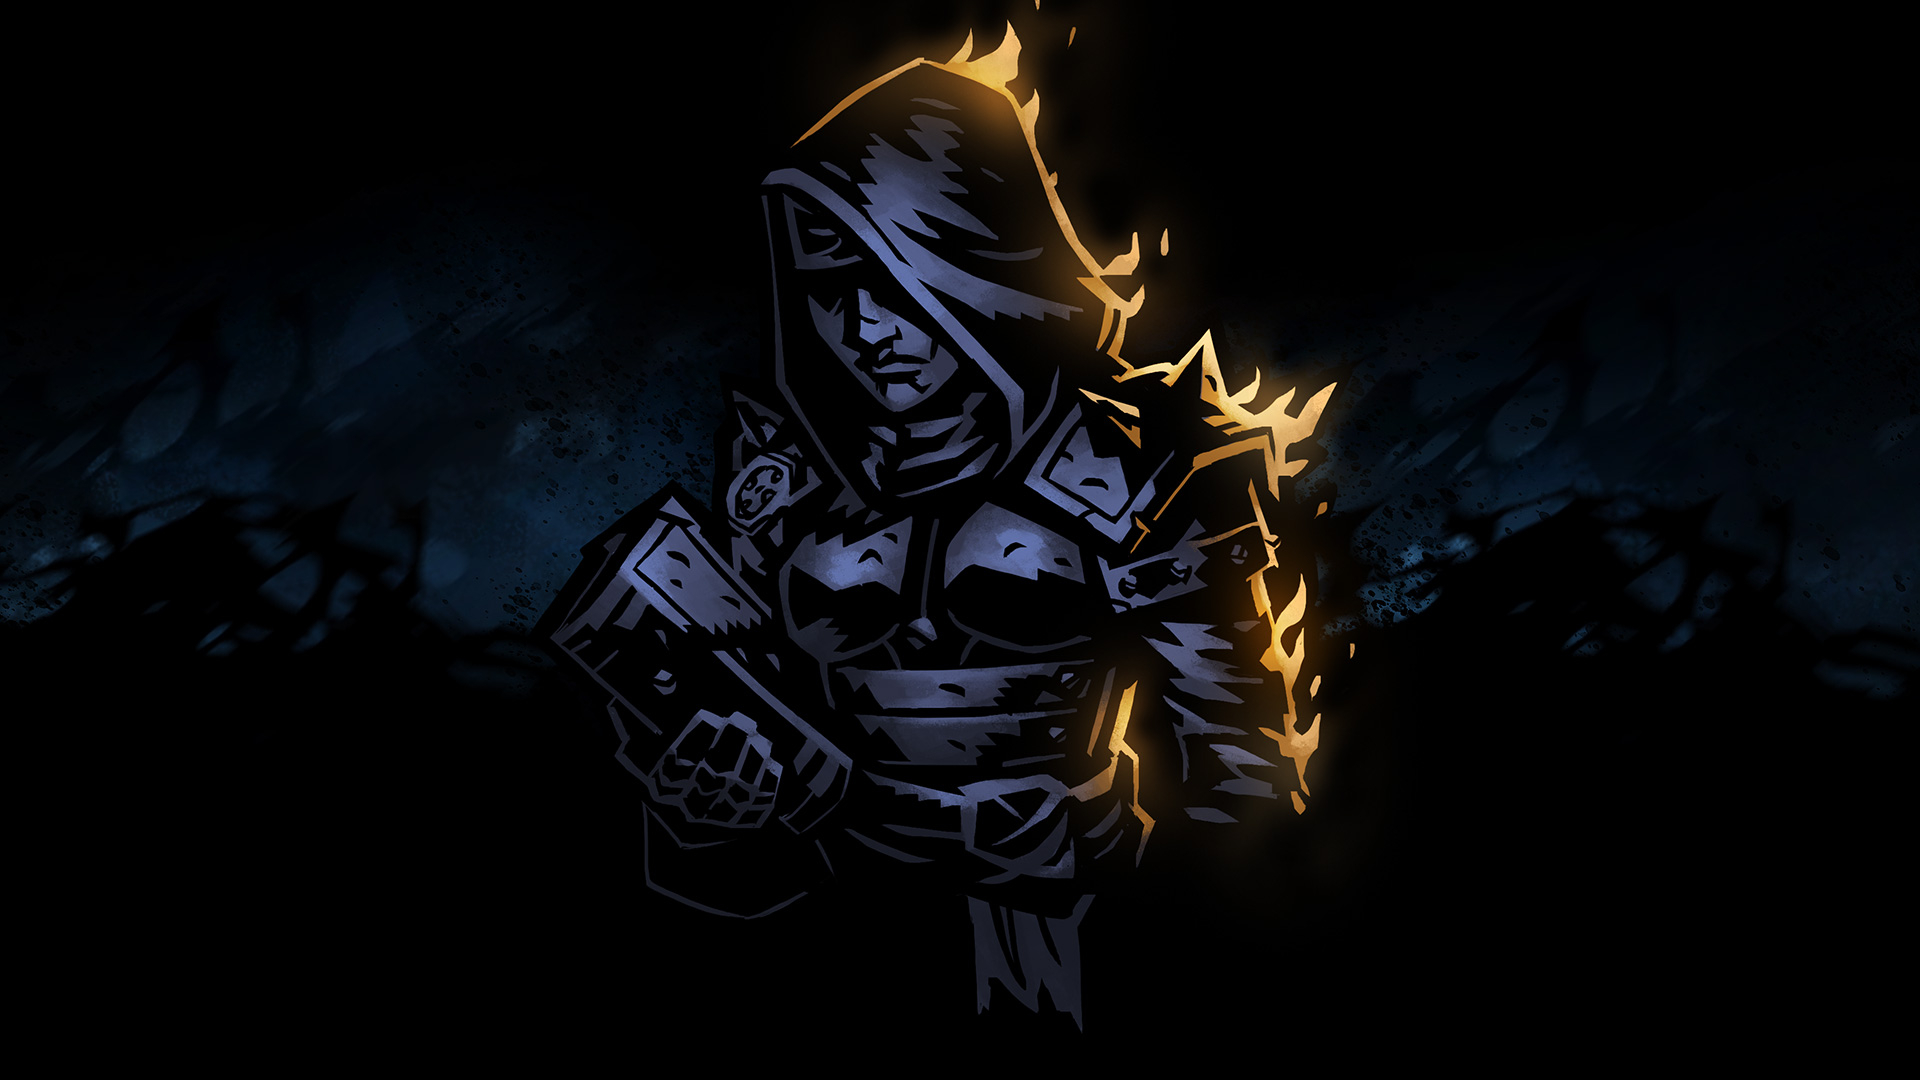 Made some Hamlet wallpapers in many stages of upgrading  rdarkestdungeon